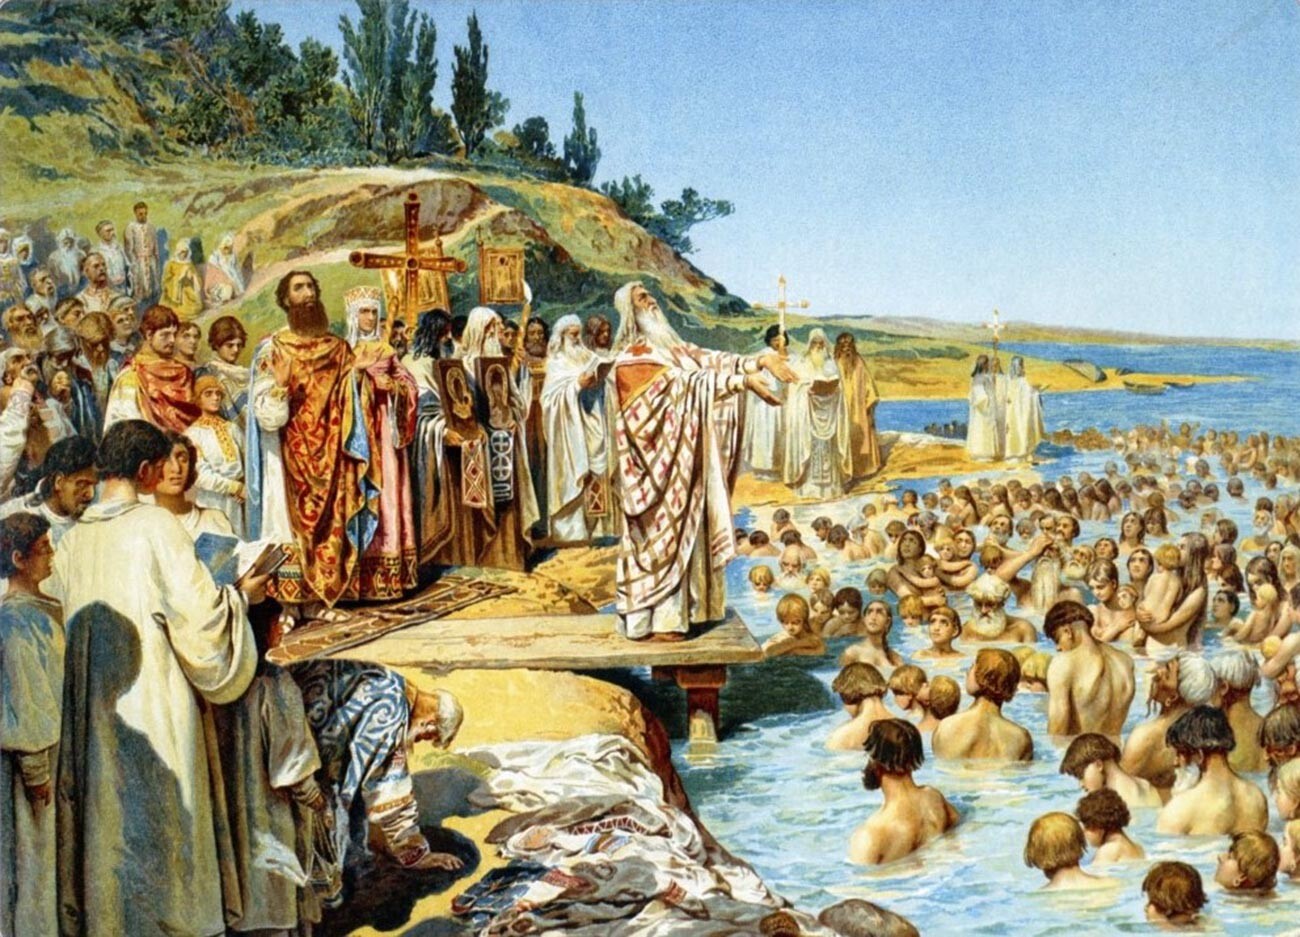 Baptism of Russia. Christianity as the state religion was introduced in Kievan Rus’ by Prince Vladimir Svyatoslavich in the year 988.